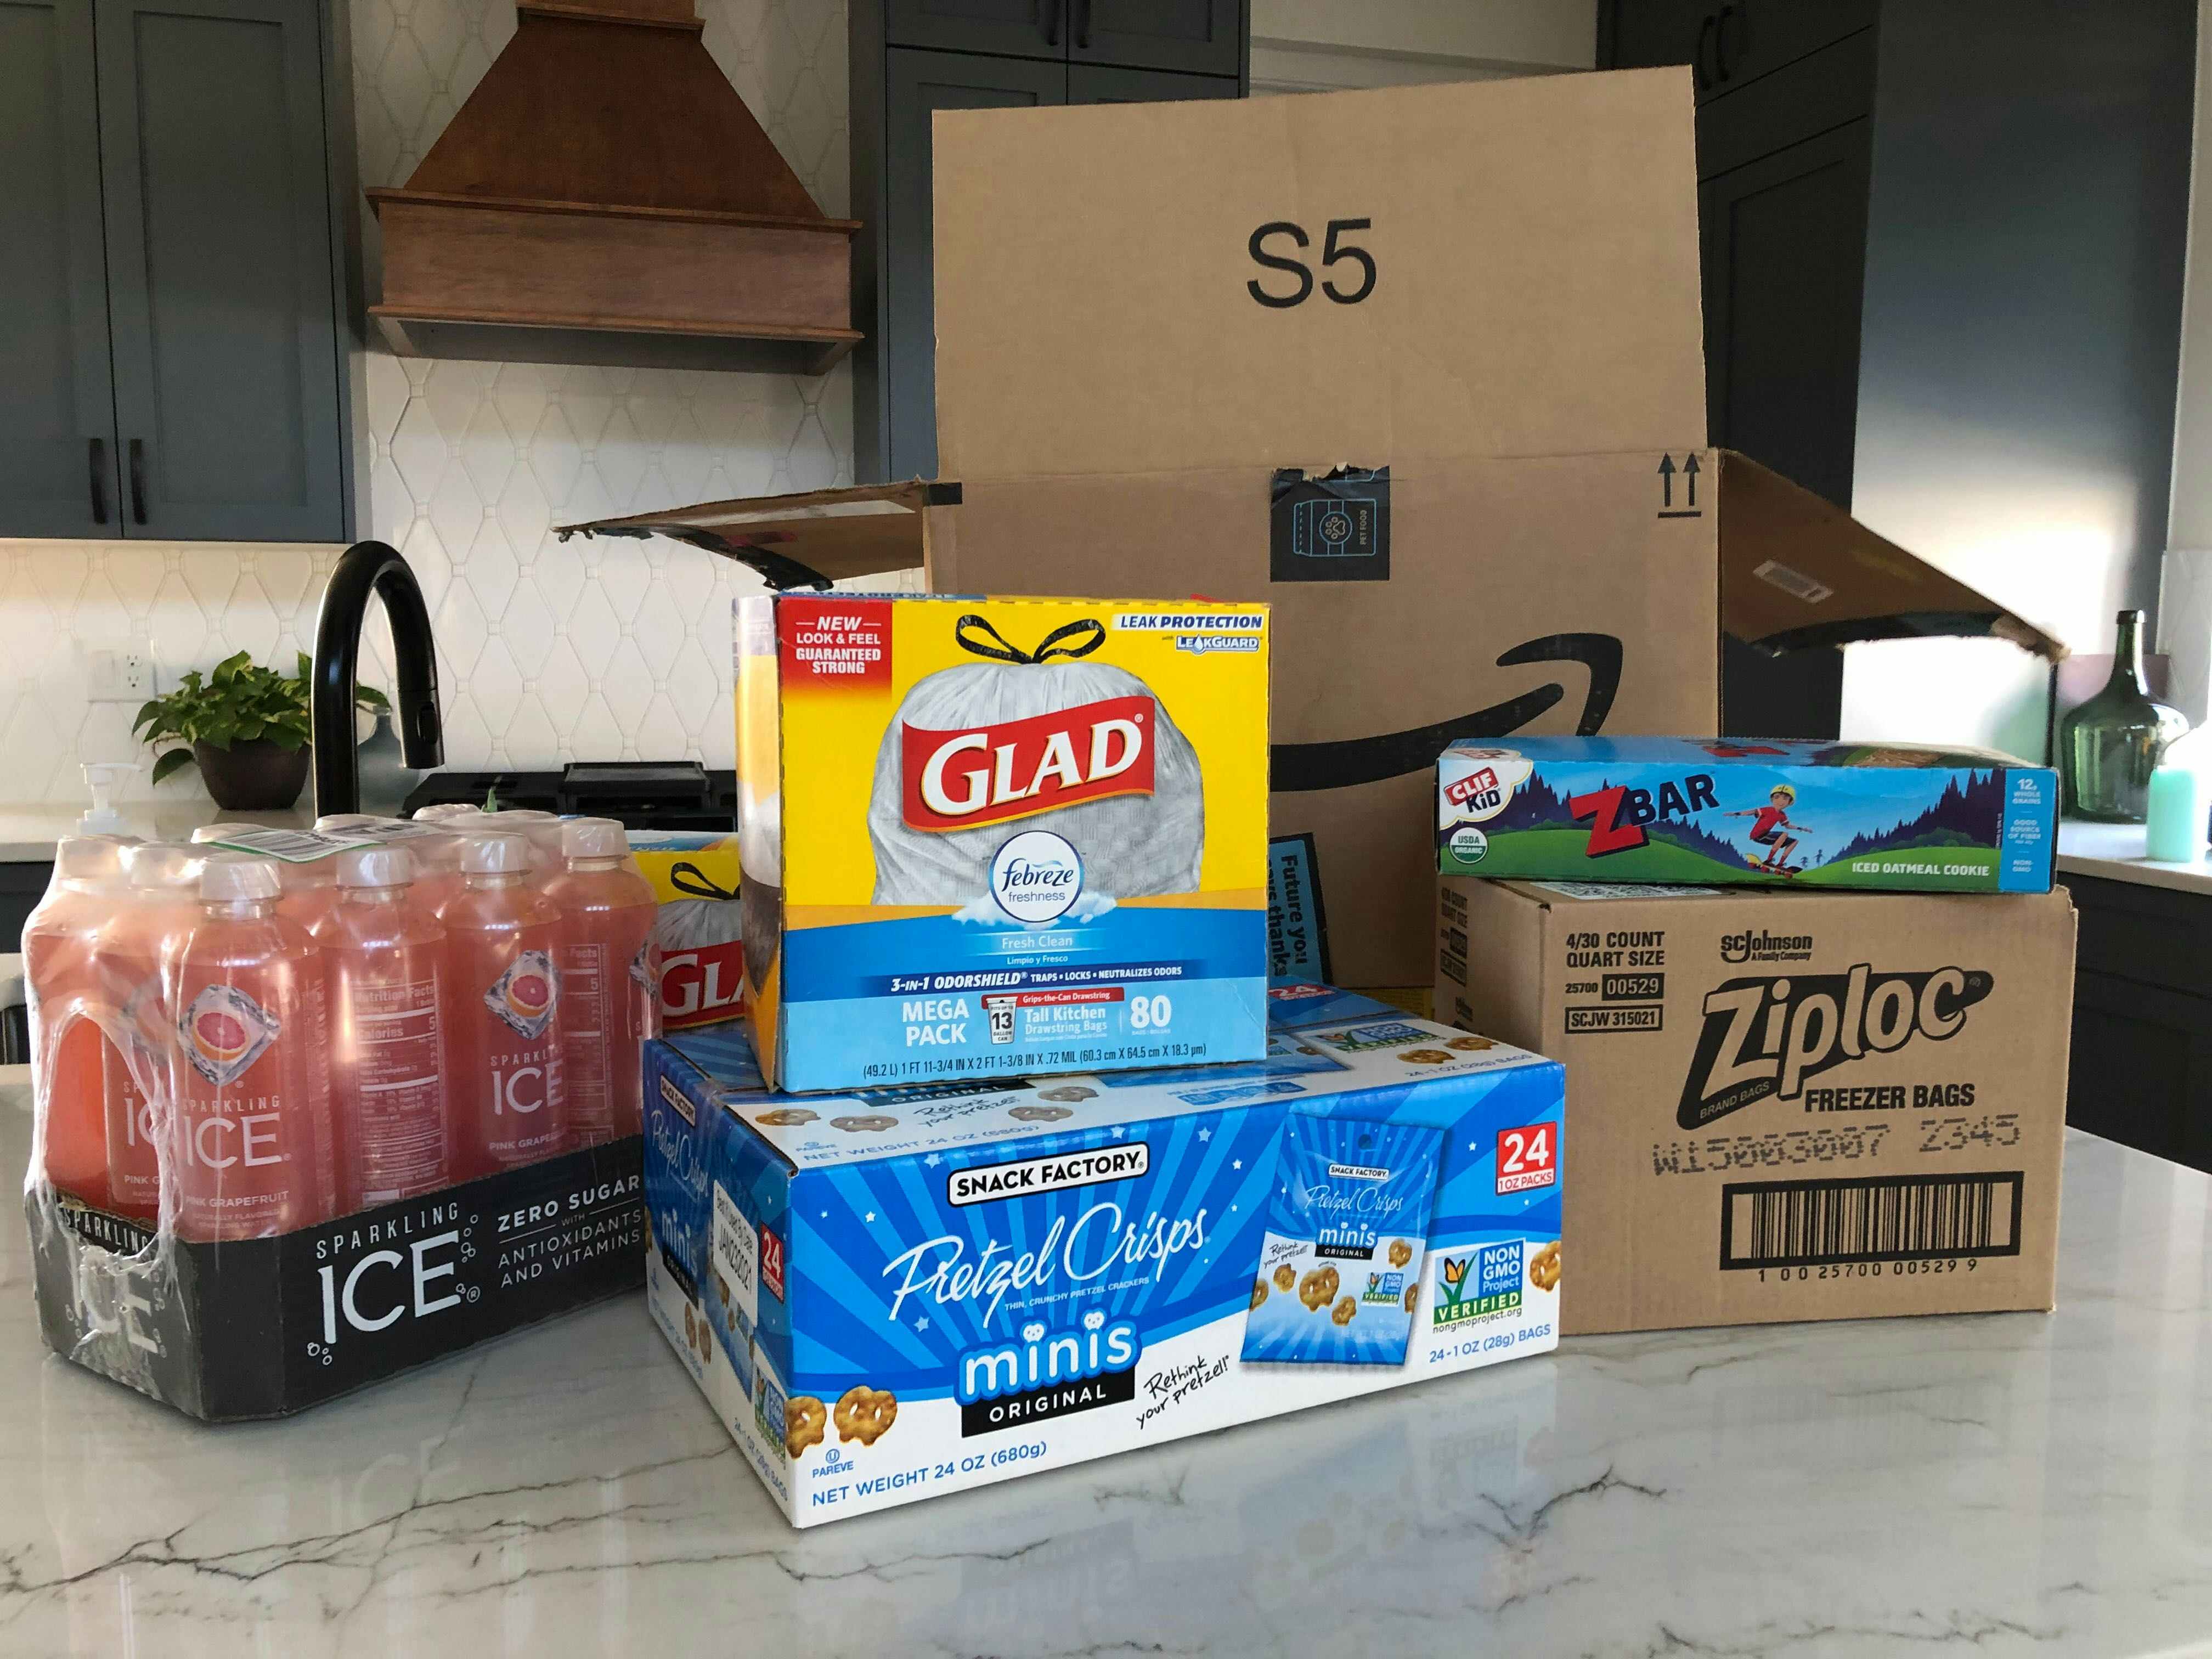 Glad garbage bags, sparking juice, pretzel snack bags, ziplock bags, and zbars sitting on a counter in front of an Amazon box